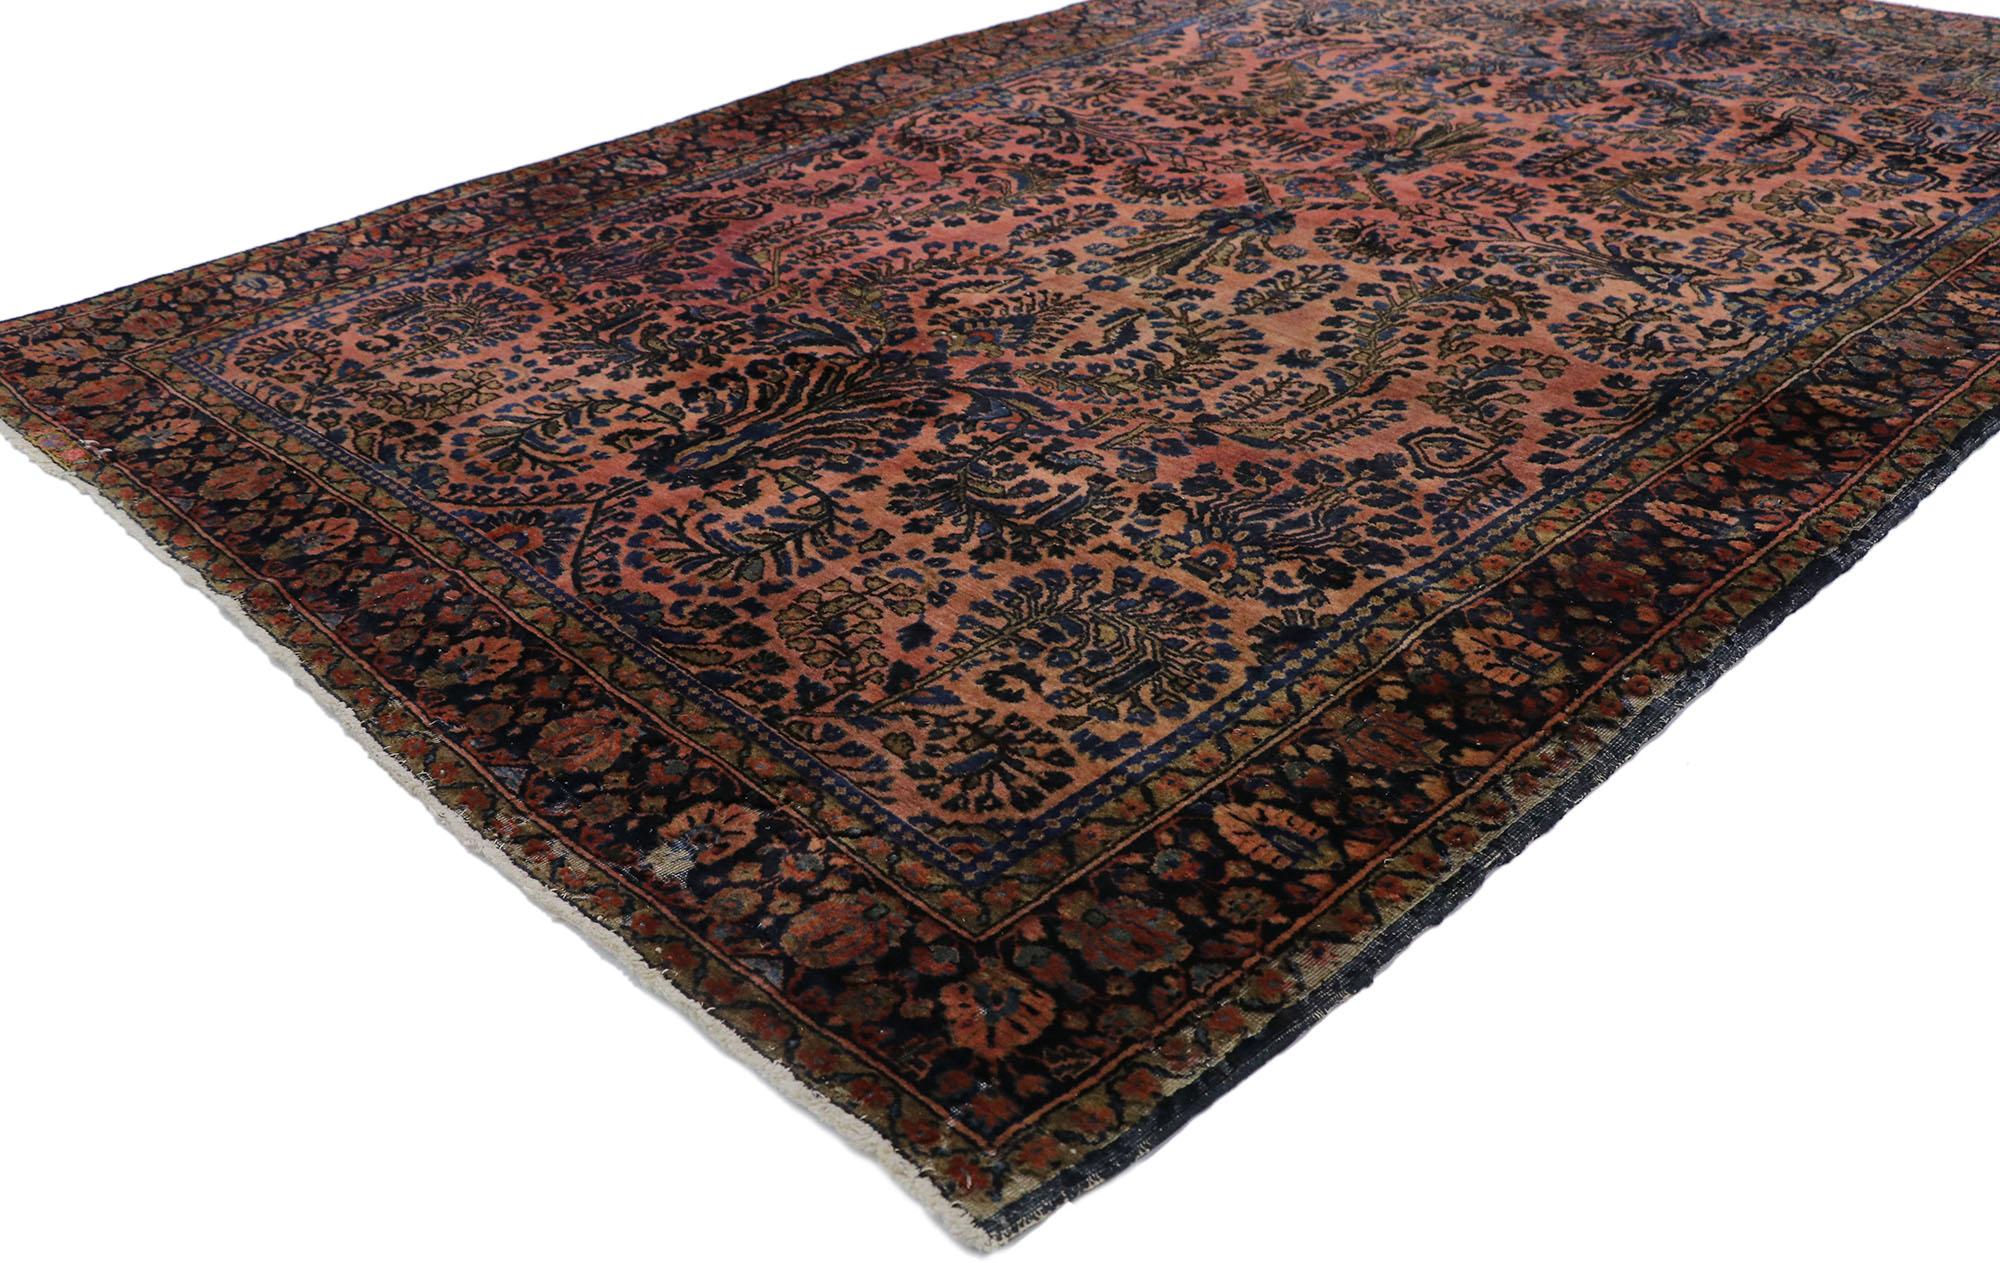 78029 Antique Persian Sarouk rug with Jacobean Style 04'02 x 06'06. With timeless floral design and a traditional color palette, this hand knotted wool antique Persian Sarouk rug is a captivating vision of woven beauty. The abrashed brick red field